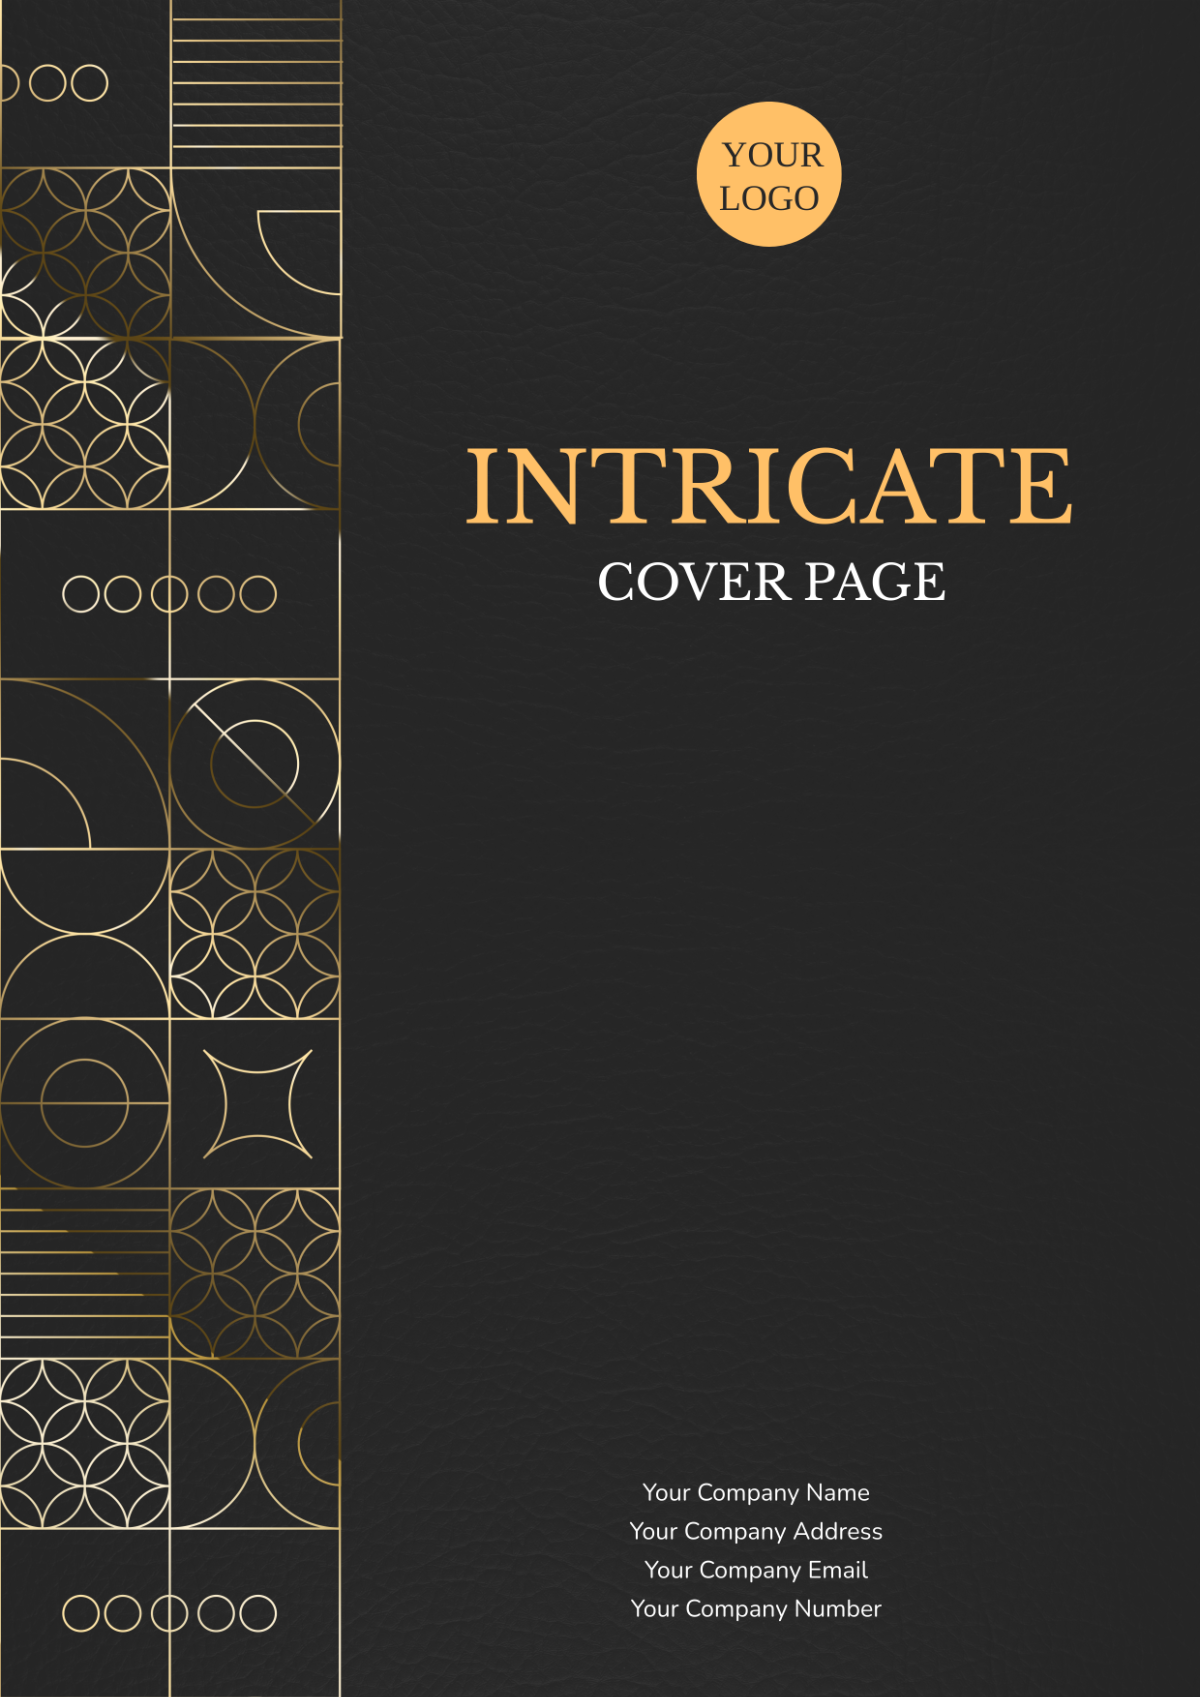 Intricate Cover Page Design